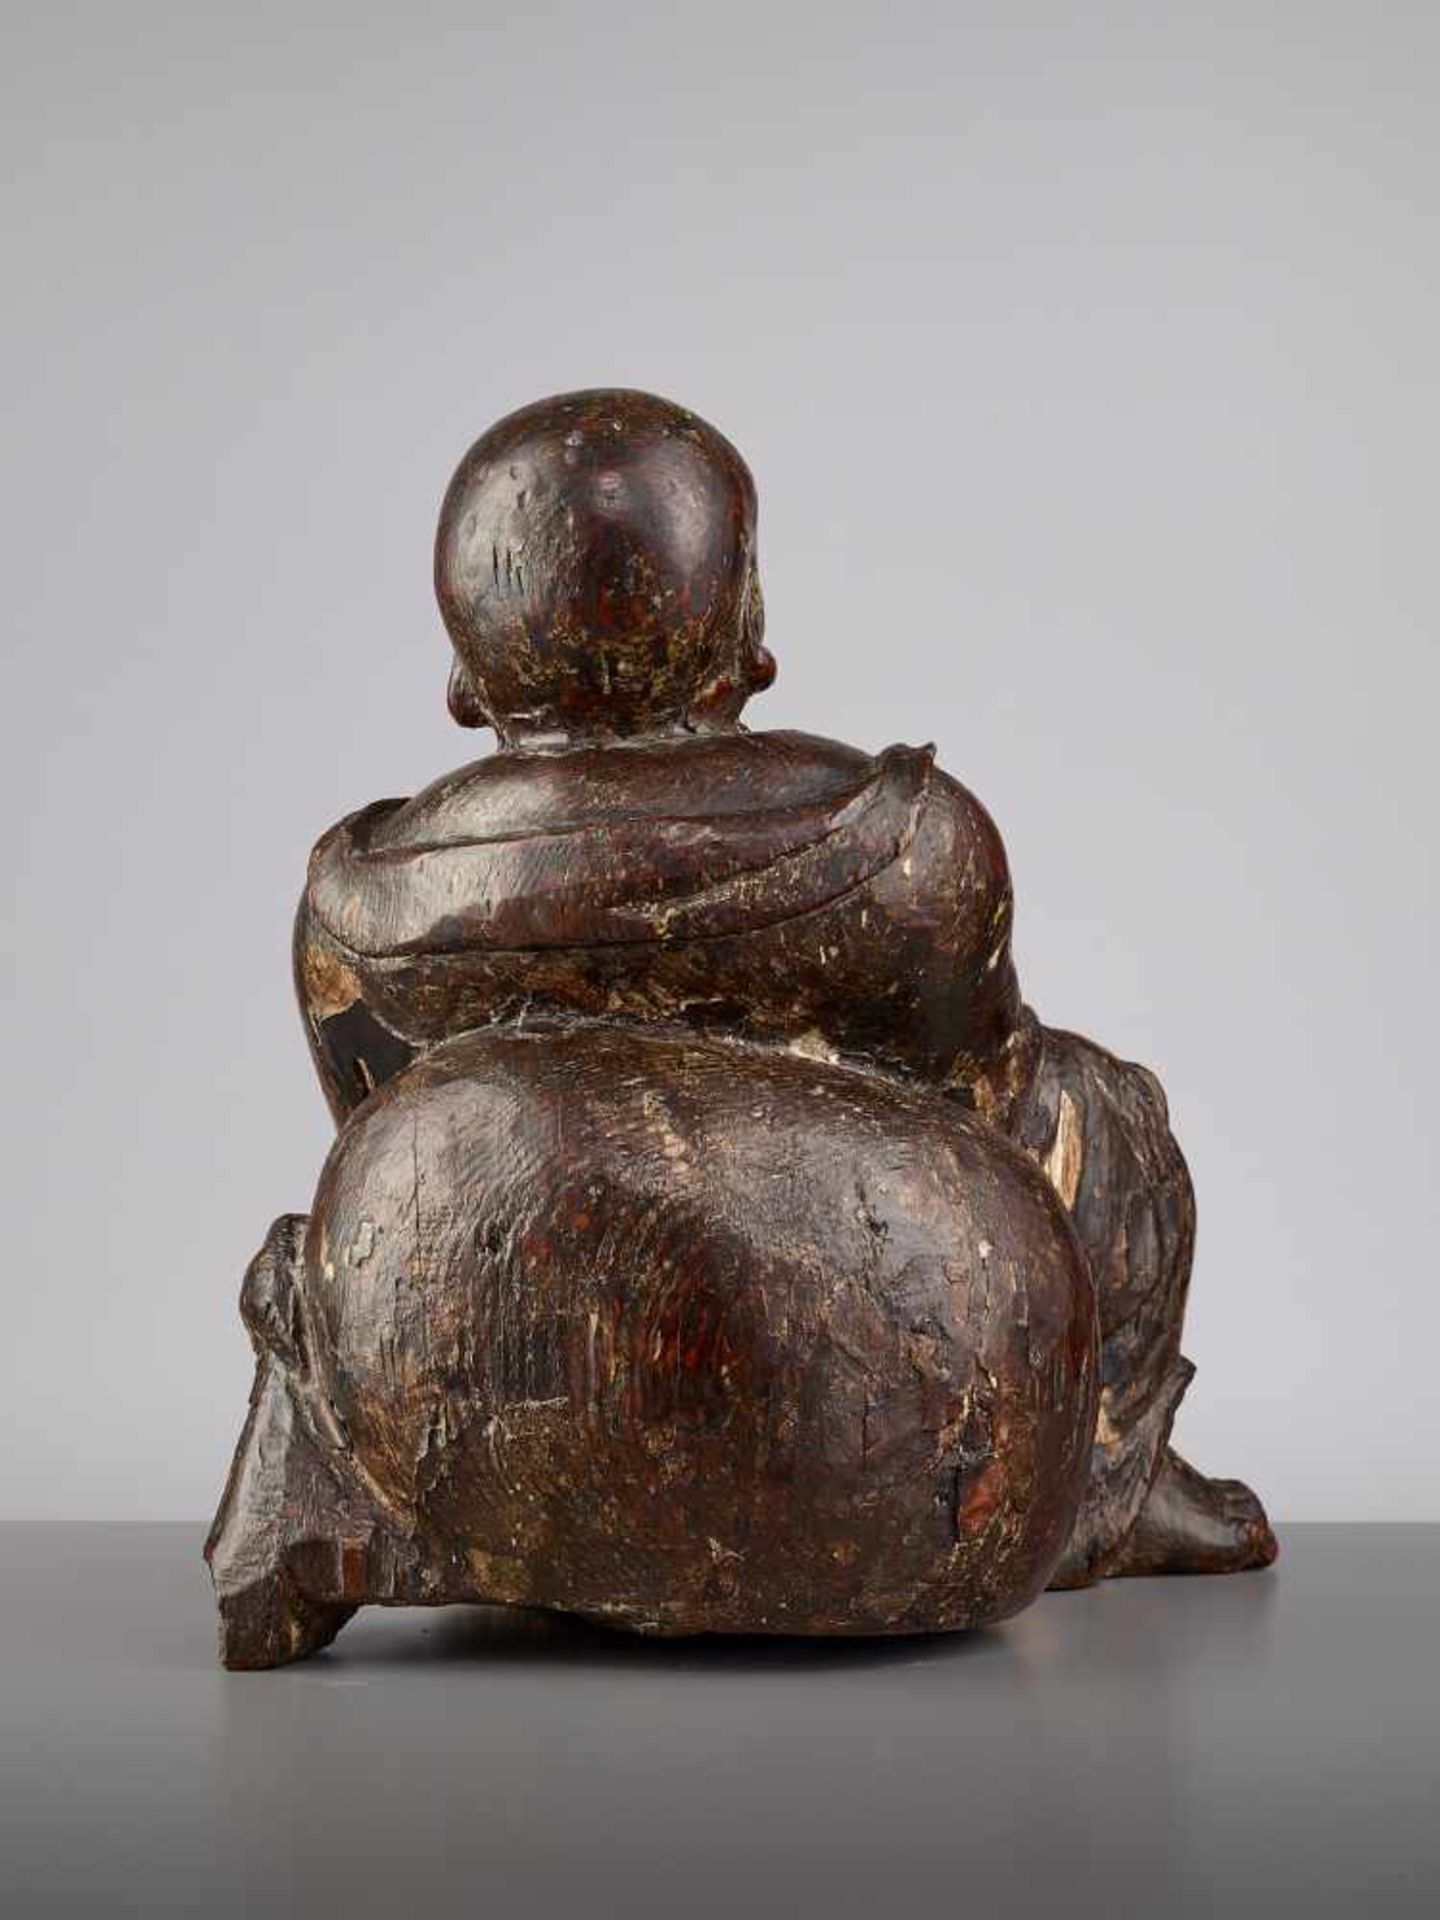 AN EXPRESSIVE WOOD BUDAI, MINGChina, 15th - 16th century. This earthy yet radiant sculpture of Budai - Image 6 of 9